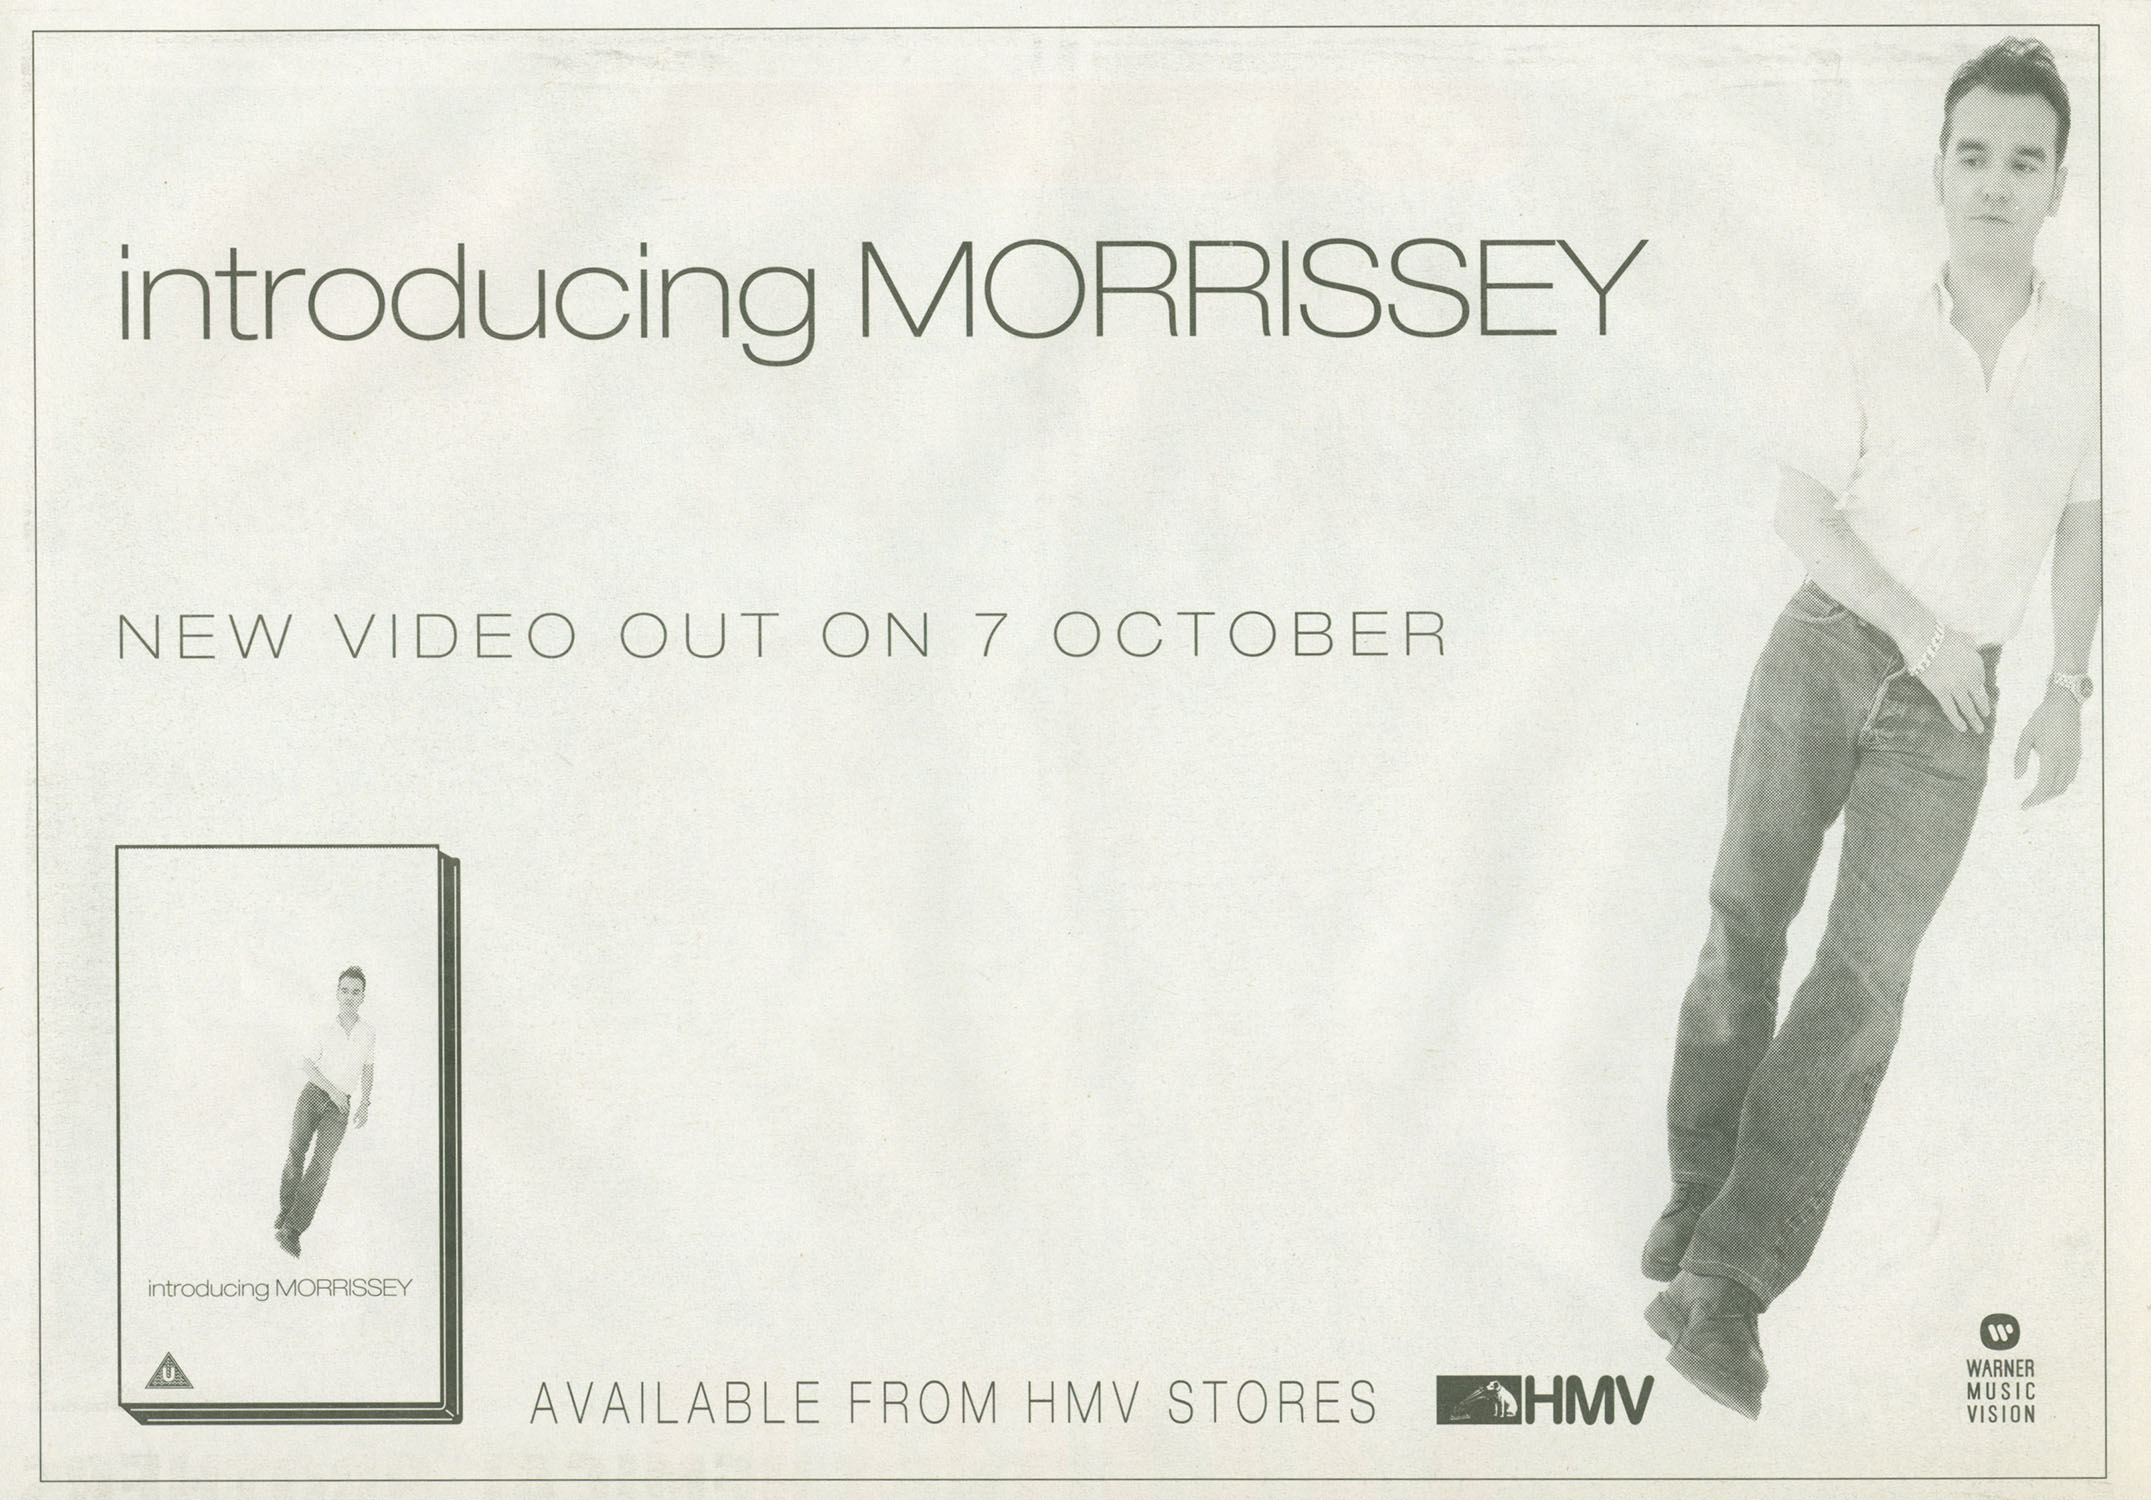 Ad, Introducing Morrissey, 1996